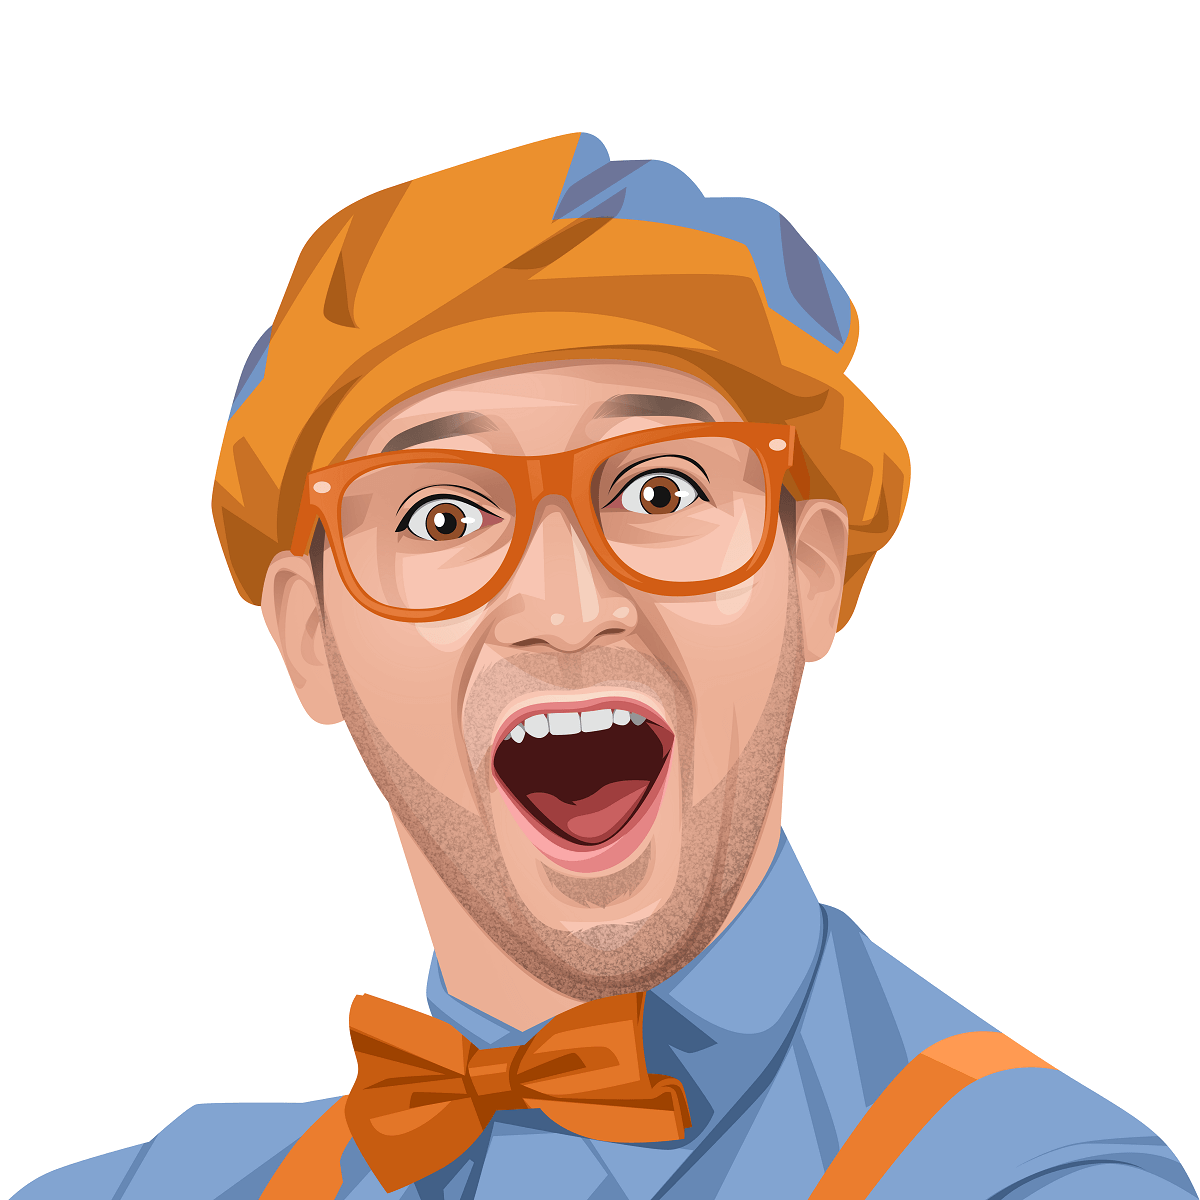 Blippi NFT portrait while posing in funny style with glasses